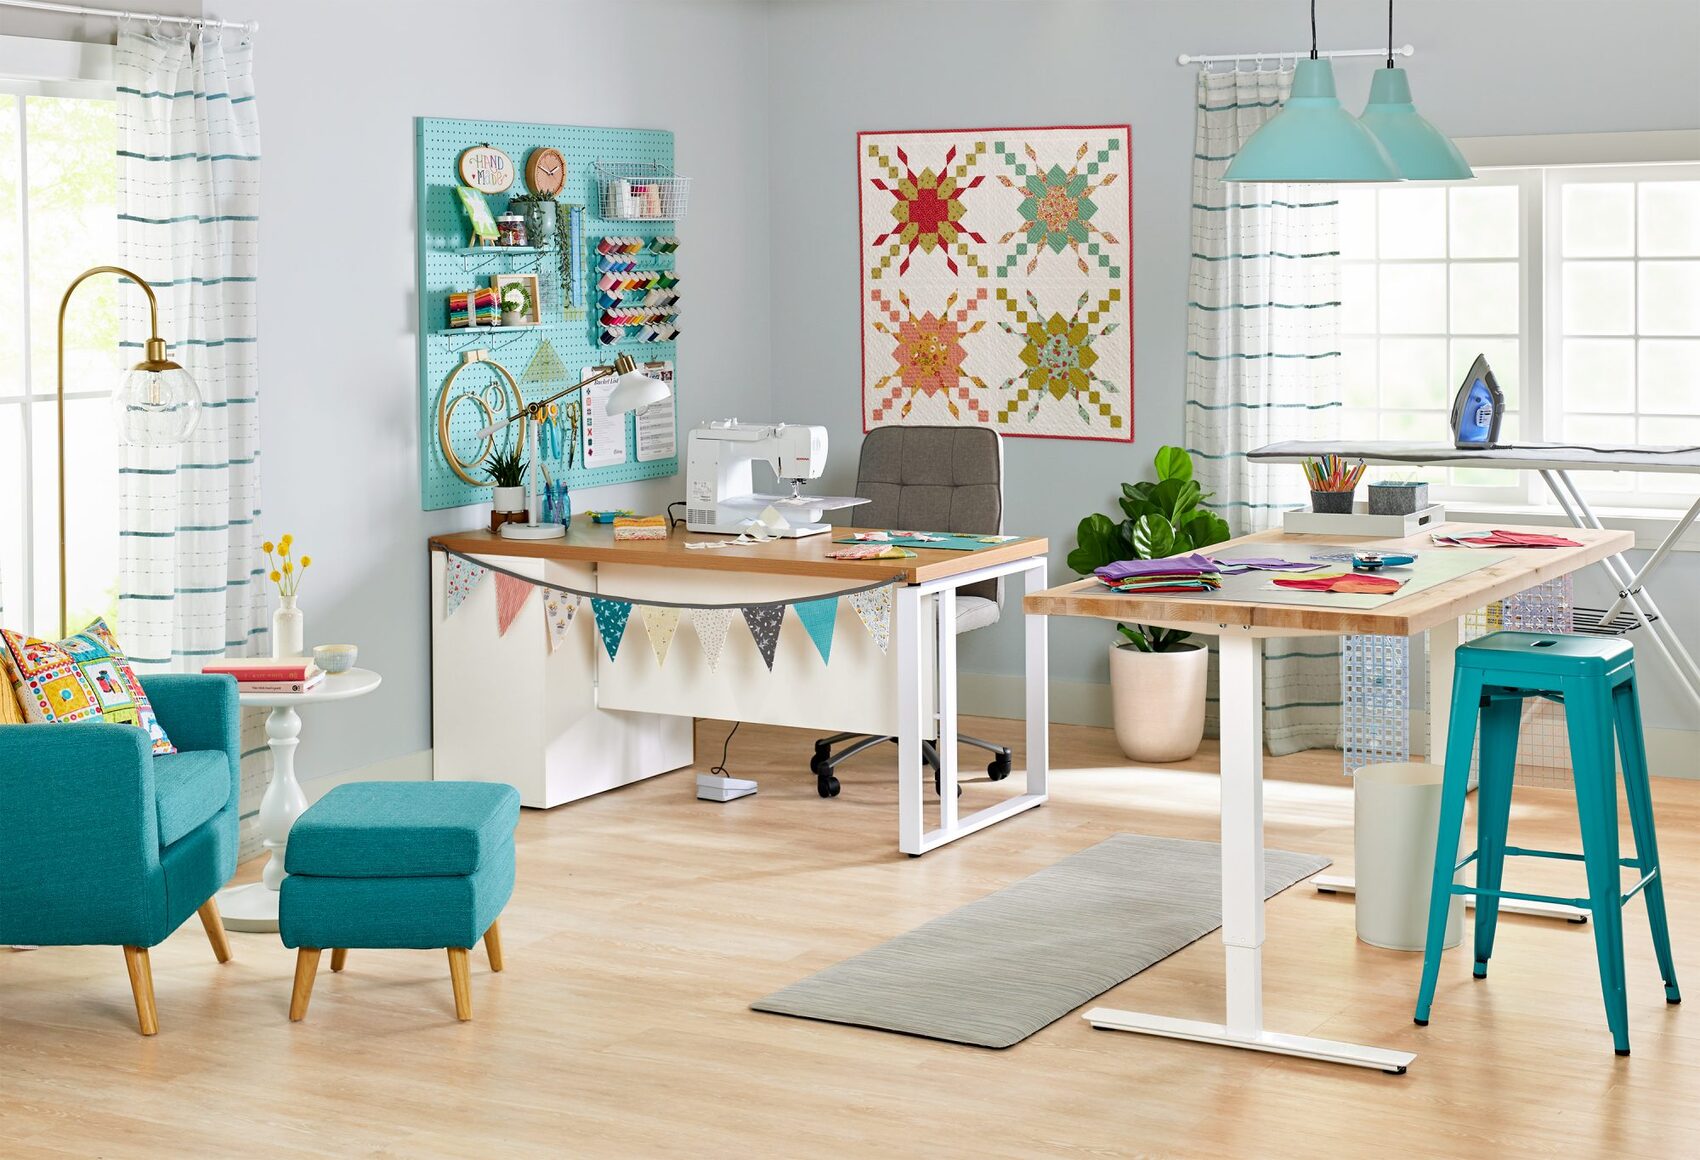 Sewing Room Ideas: 8 Creative Spaces For Crafting